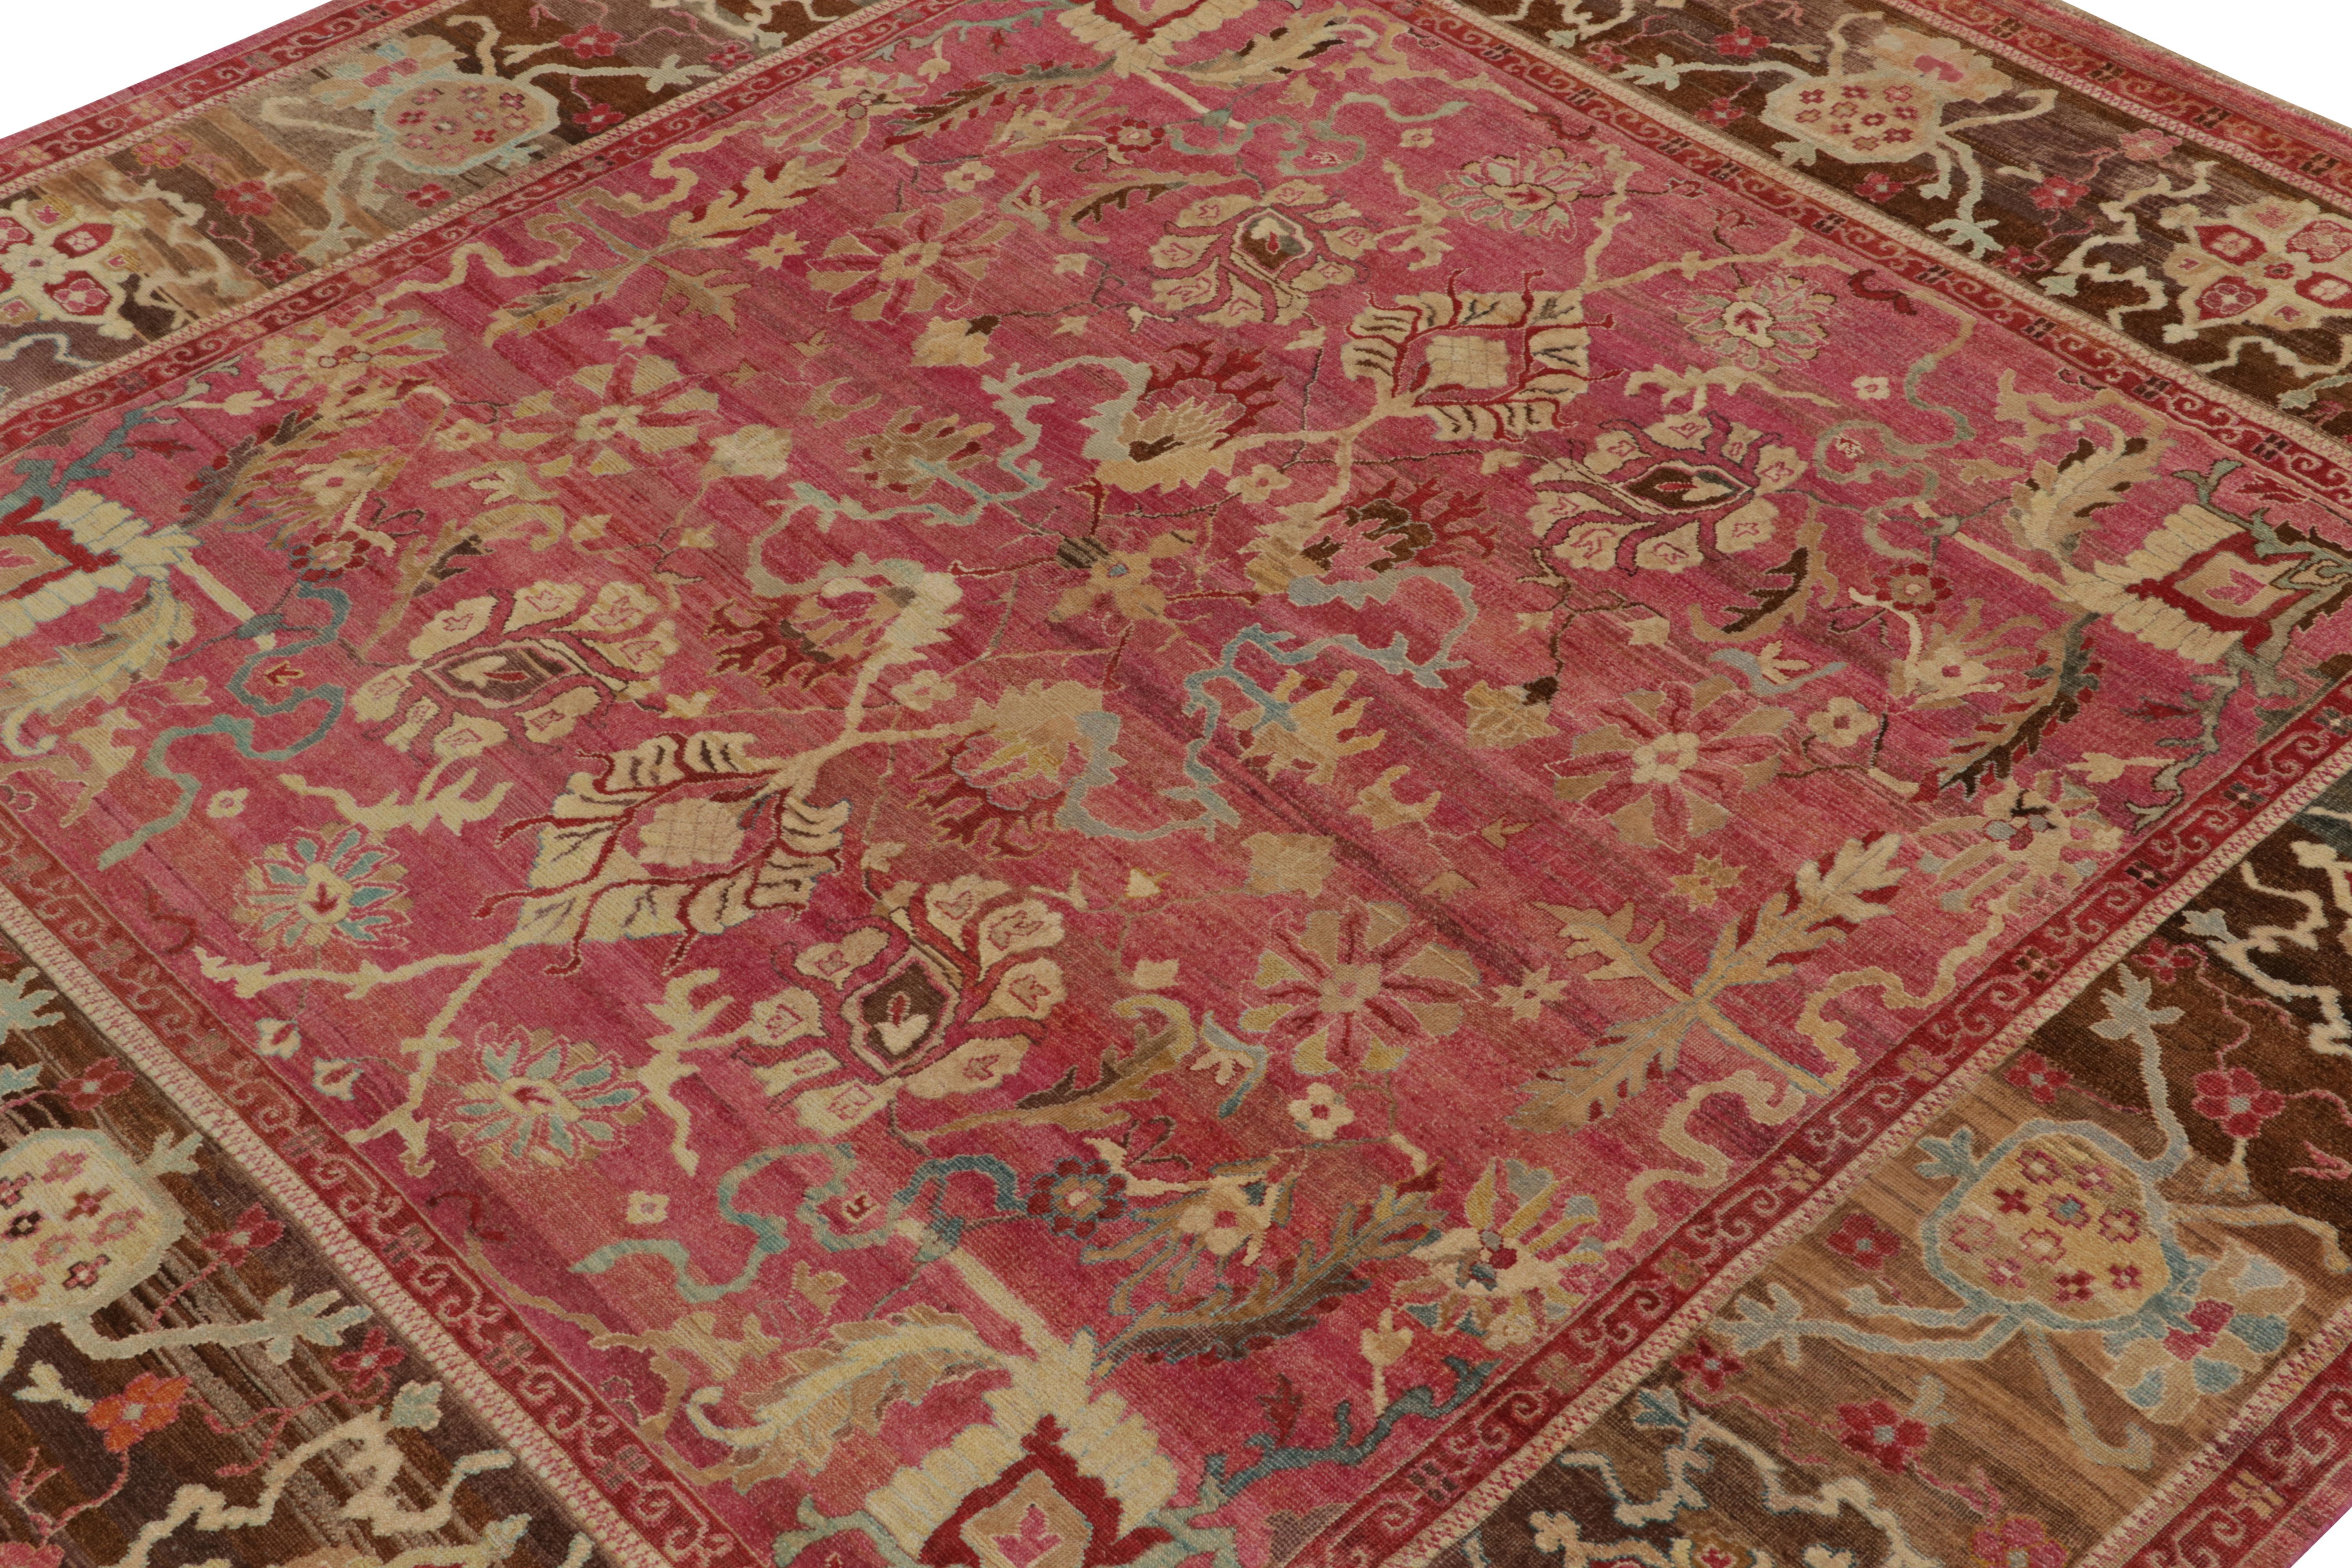 Indian Rug & Kilim’s Classic Style Square Rug in Pink, Red and Beige-Brown Florals For Sale